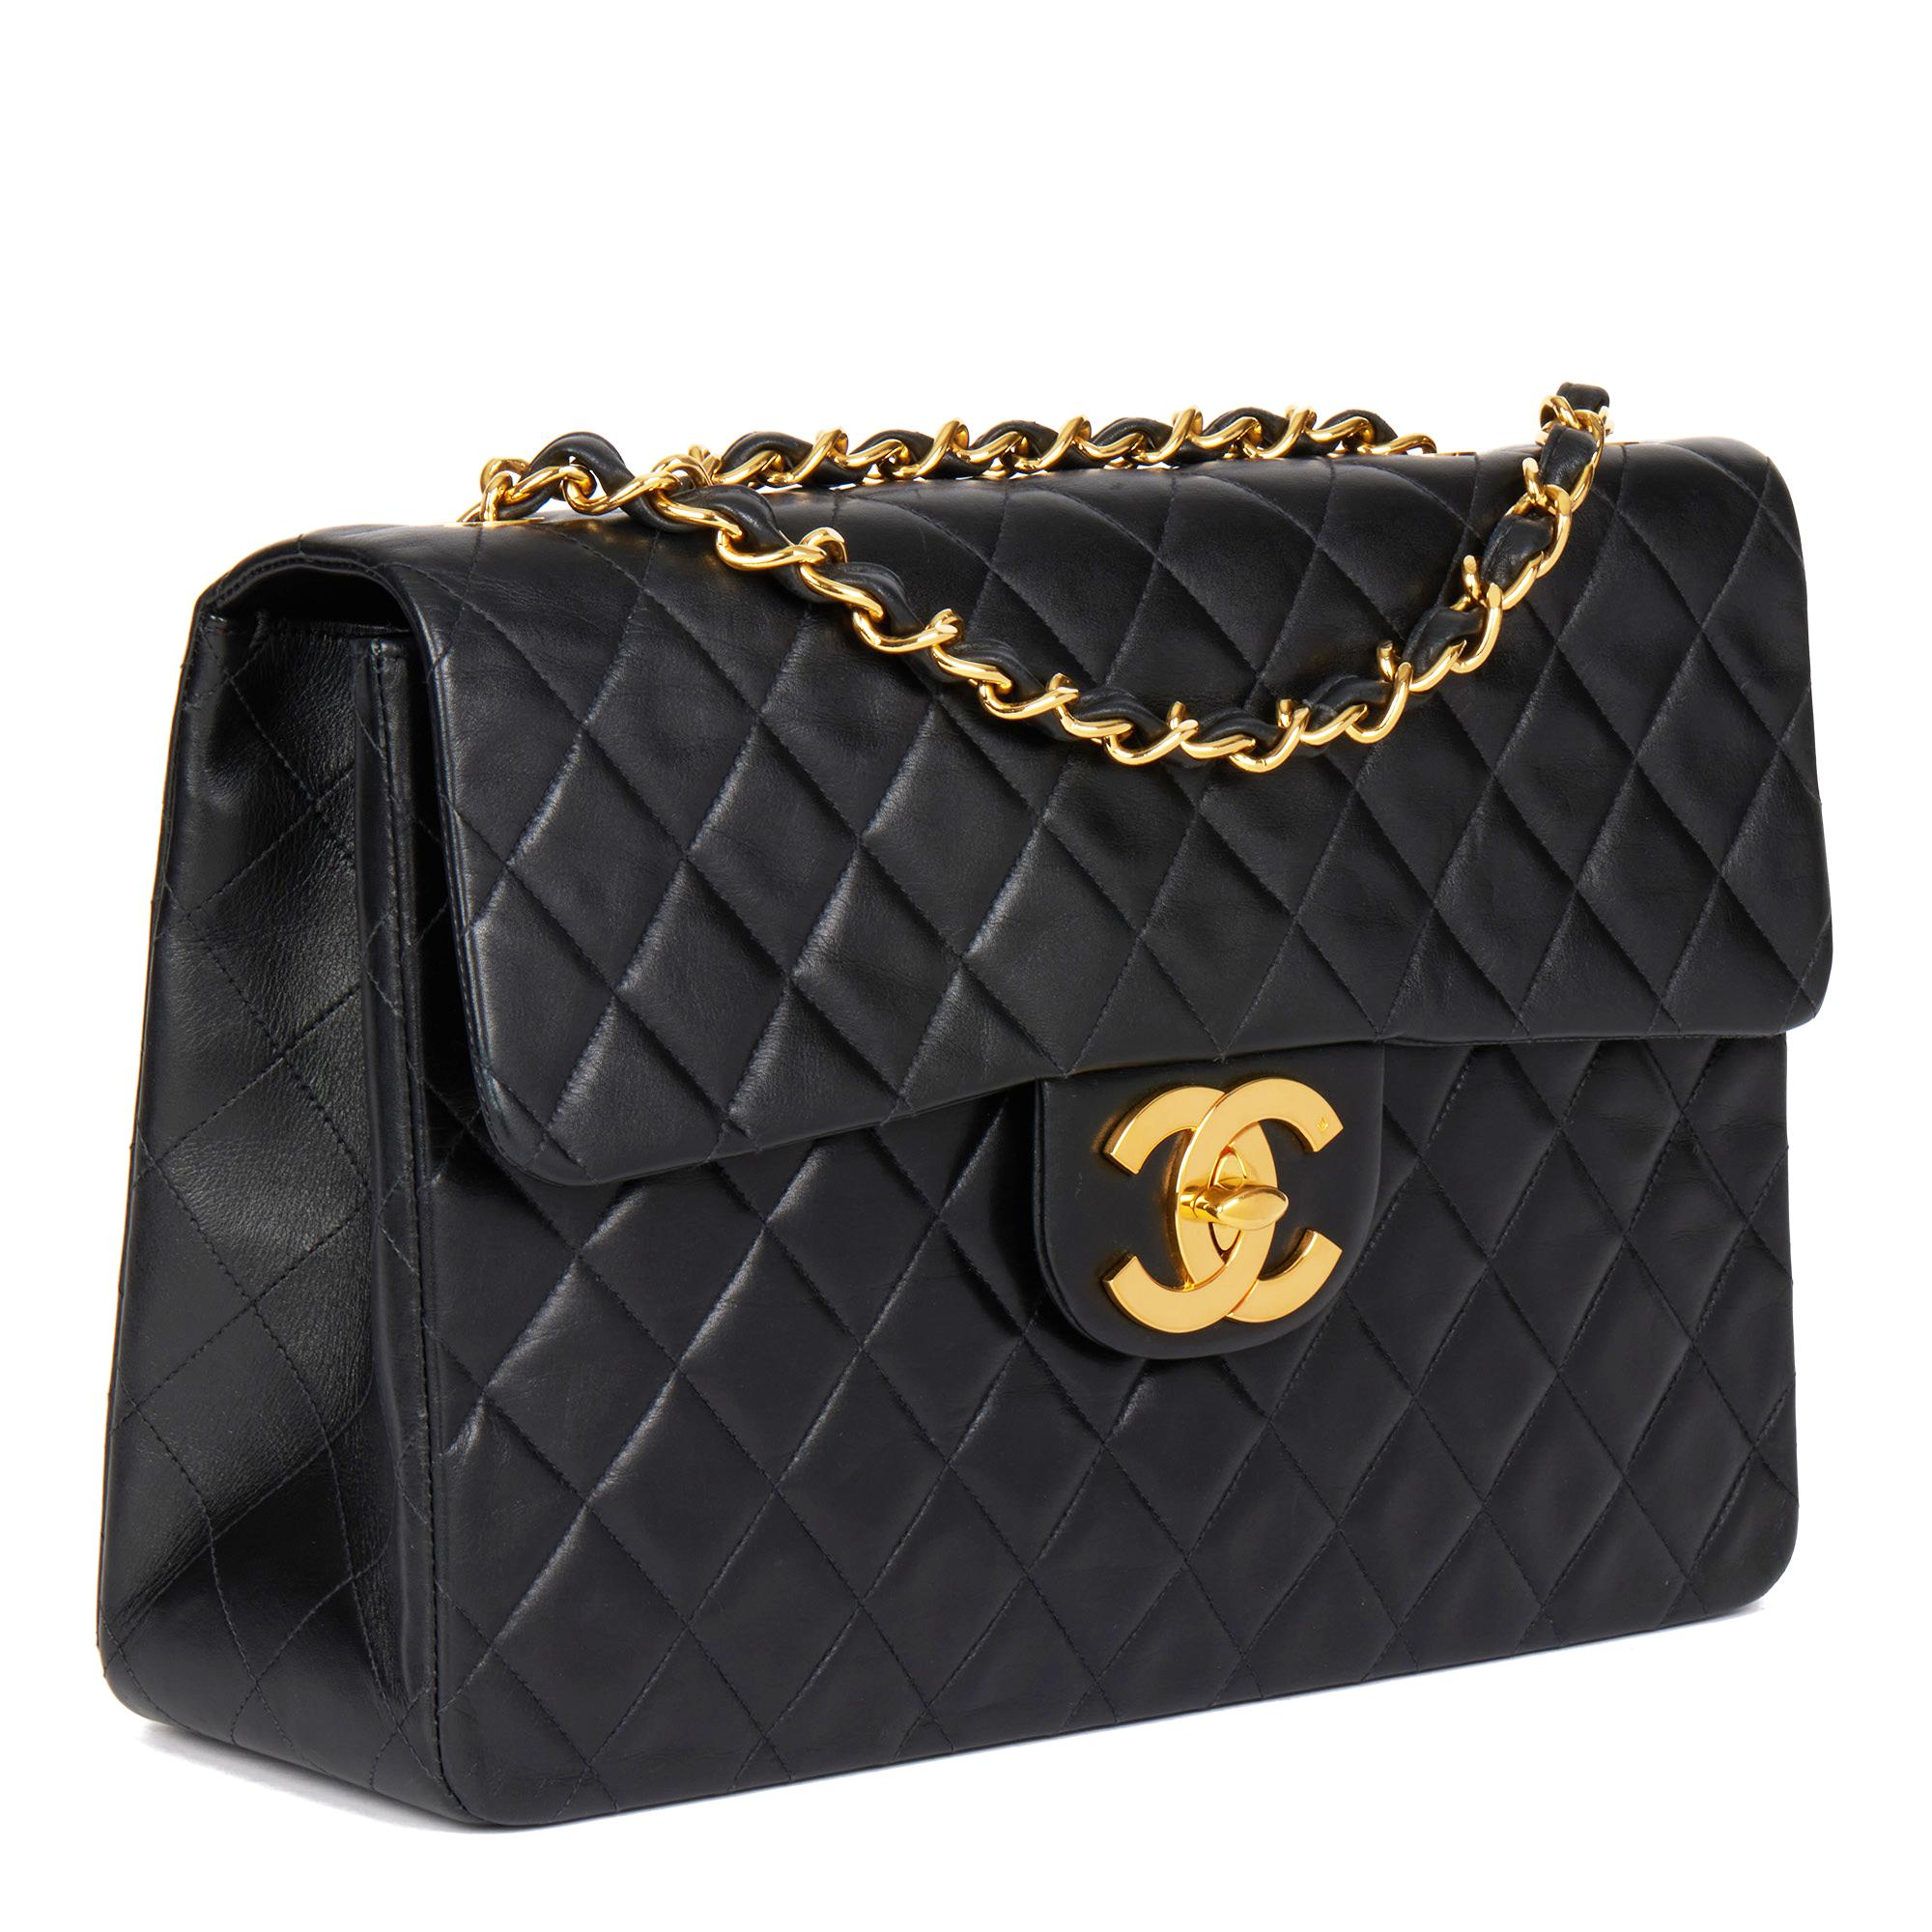 CHANEL
Black Quilted Lambskin Vintage Maxi Jumbo XL Classic Single Flap Bag

Xupes Reference: HB4691
Serial Number: 2626756
Age (Circa): 1992
Accompanied By: Chanel Dust Bag, Authenticity Card
Authenticity Details: Authenticity Card, Serial Sticker